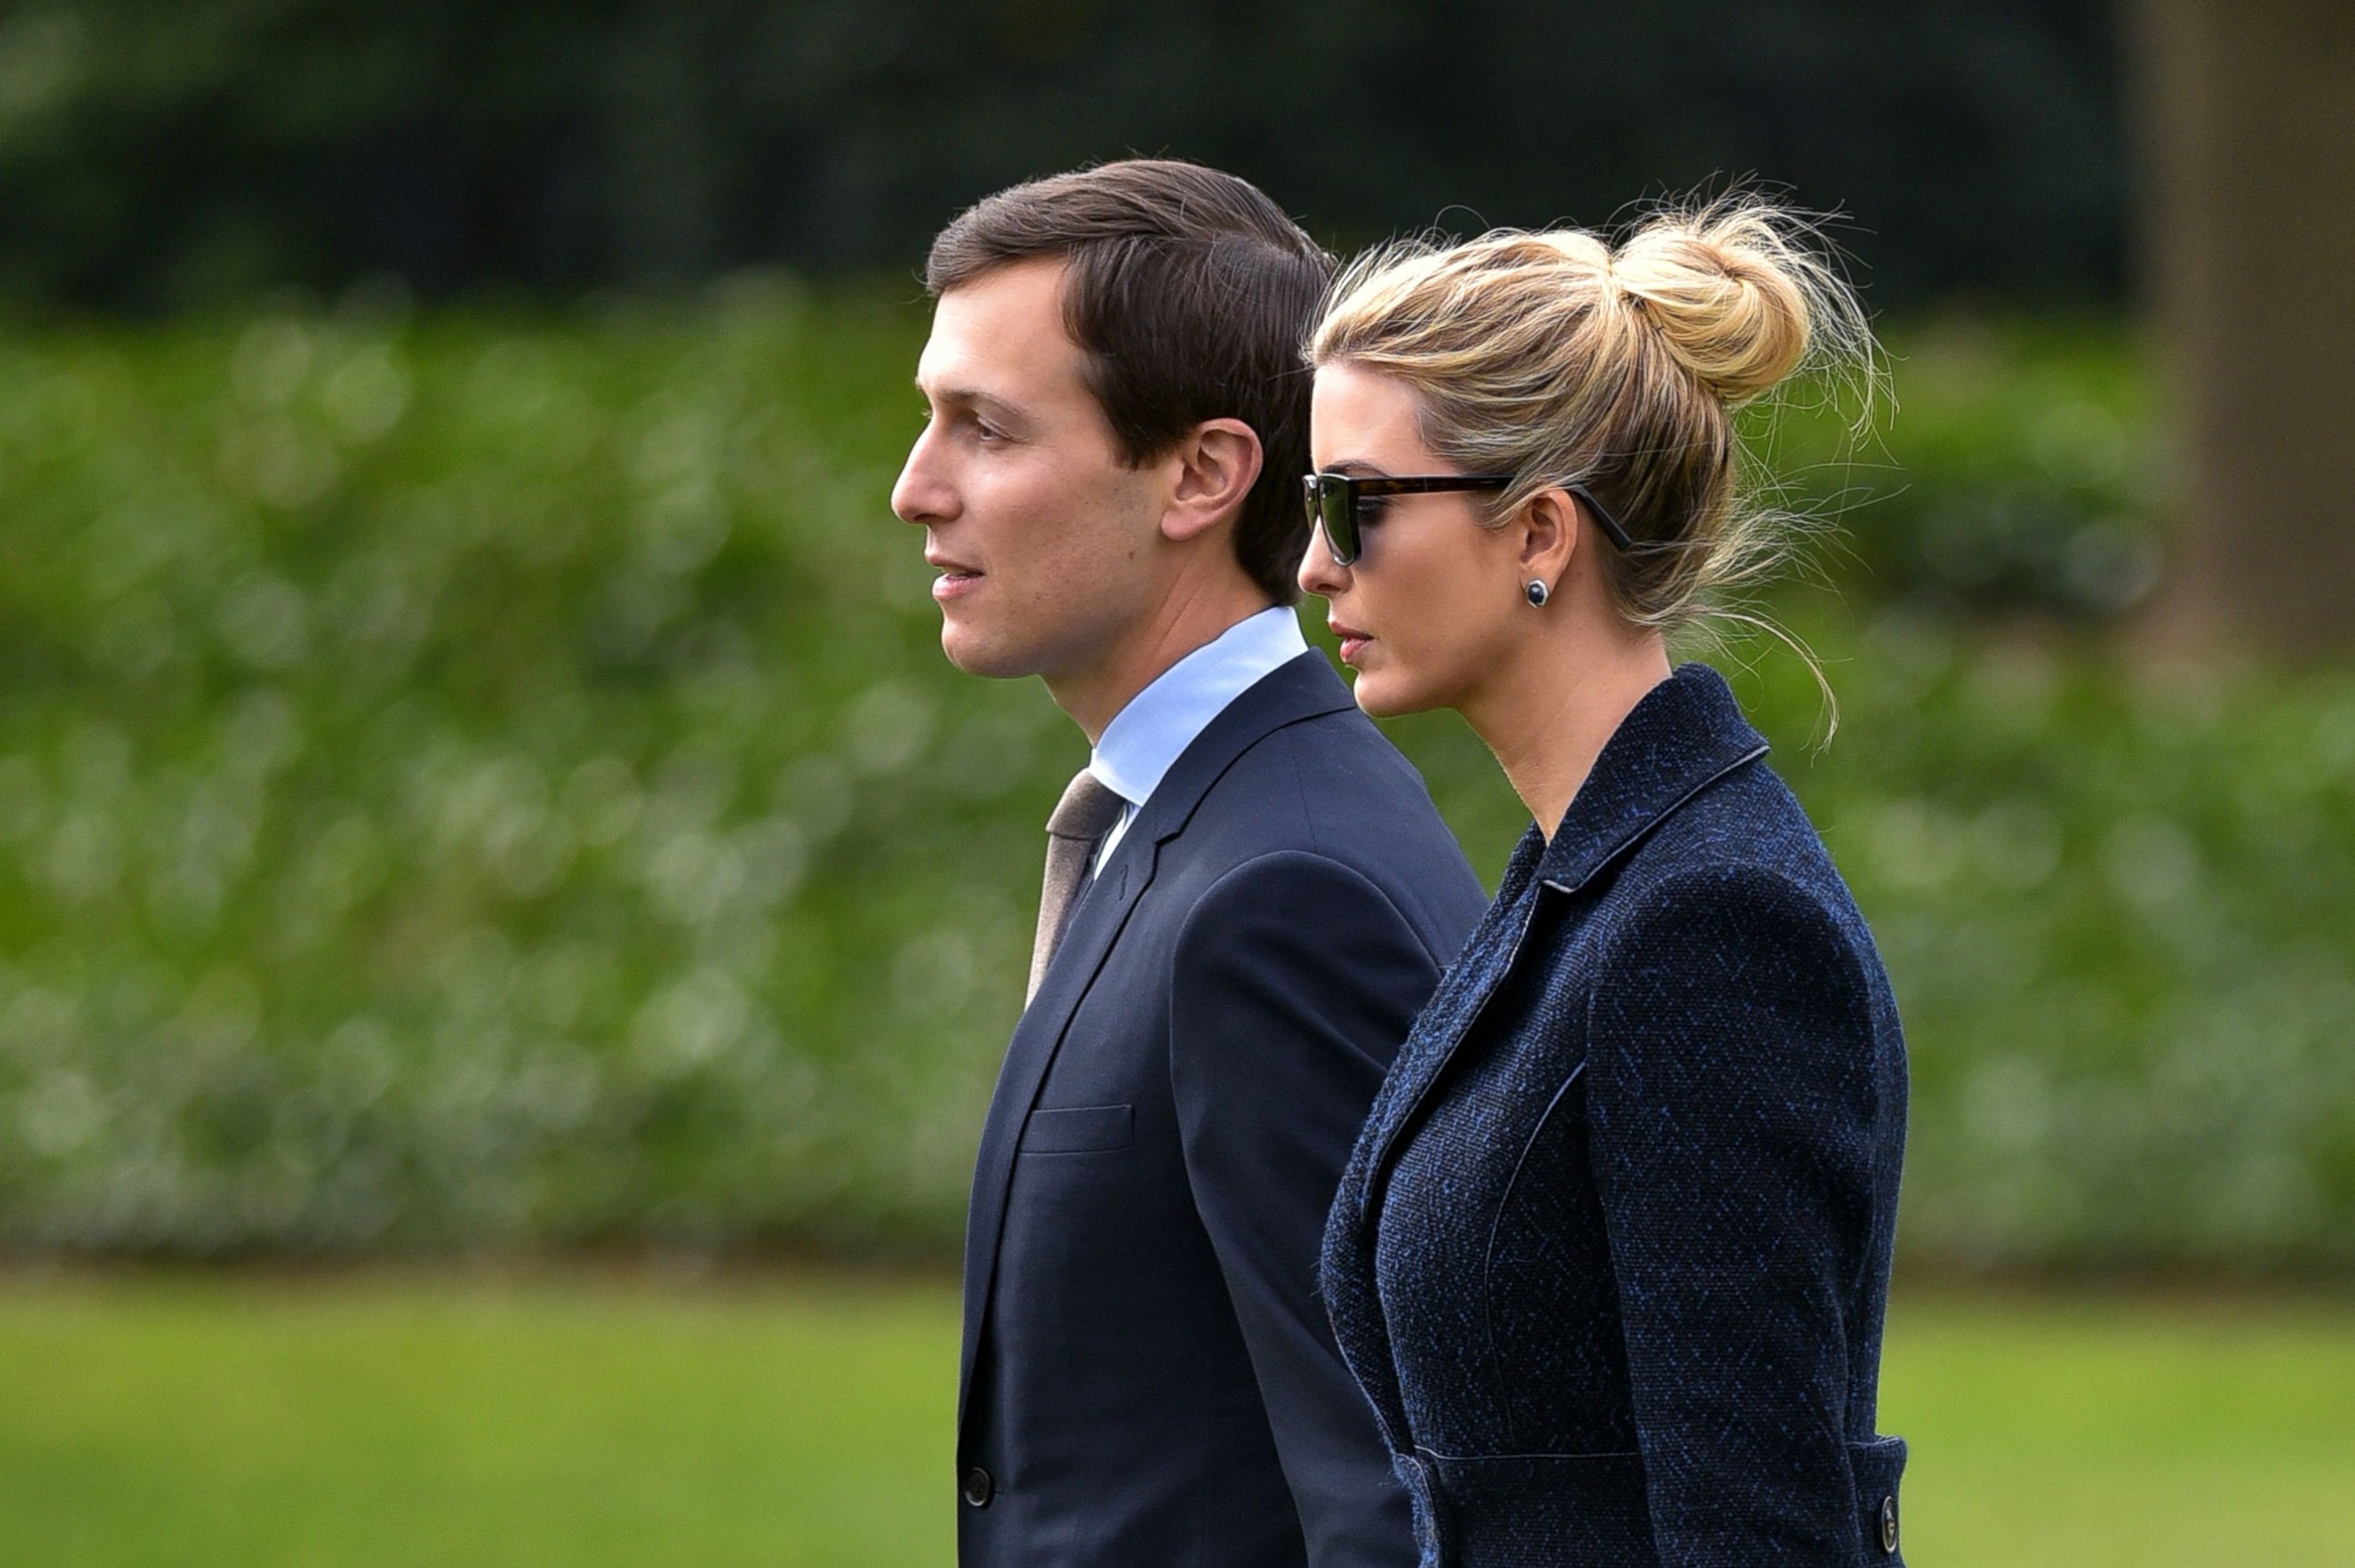 PHOTO: Senior Advisor to the President, Jared Kushner, left, walks with his wife Ivanka Trump to board Marine One at the White House in Washington, D.C., March 3, 2017.